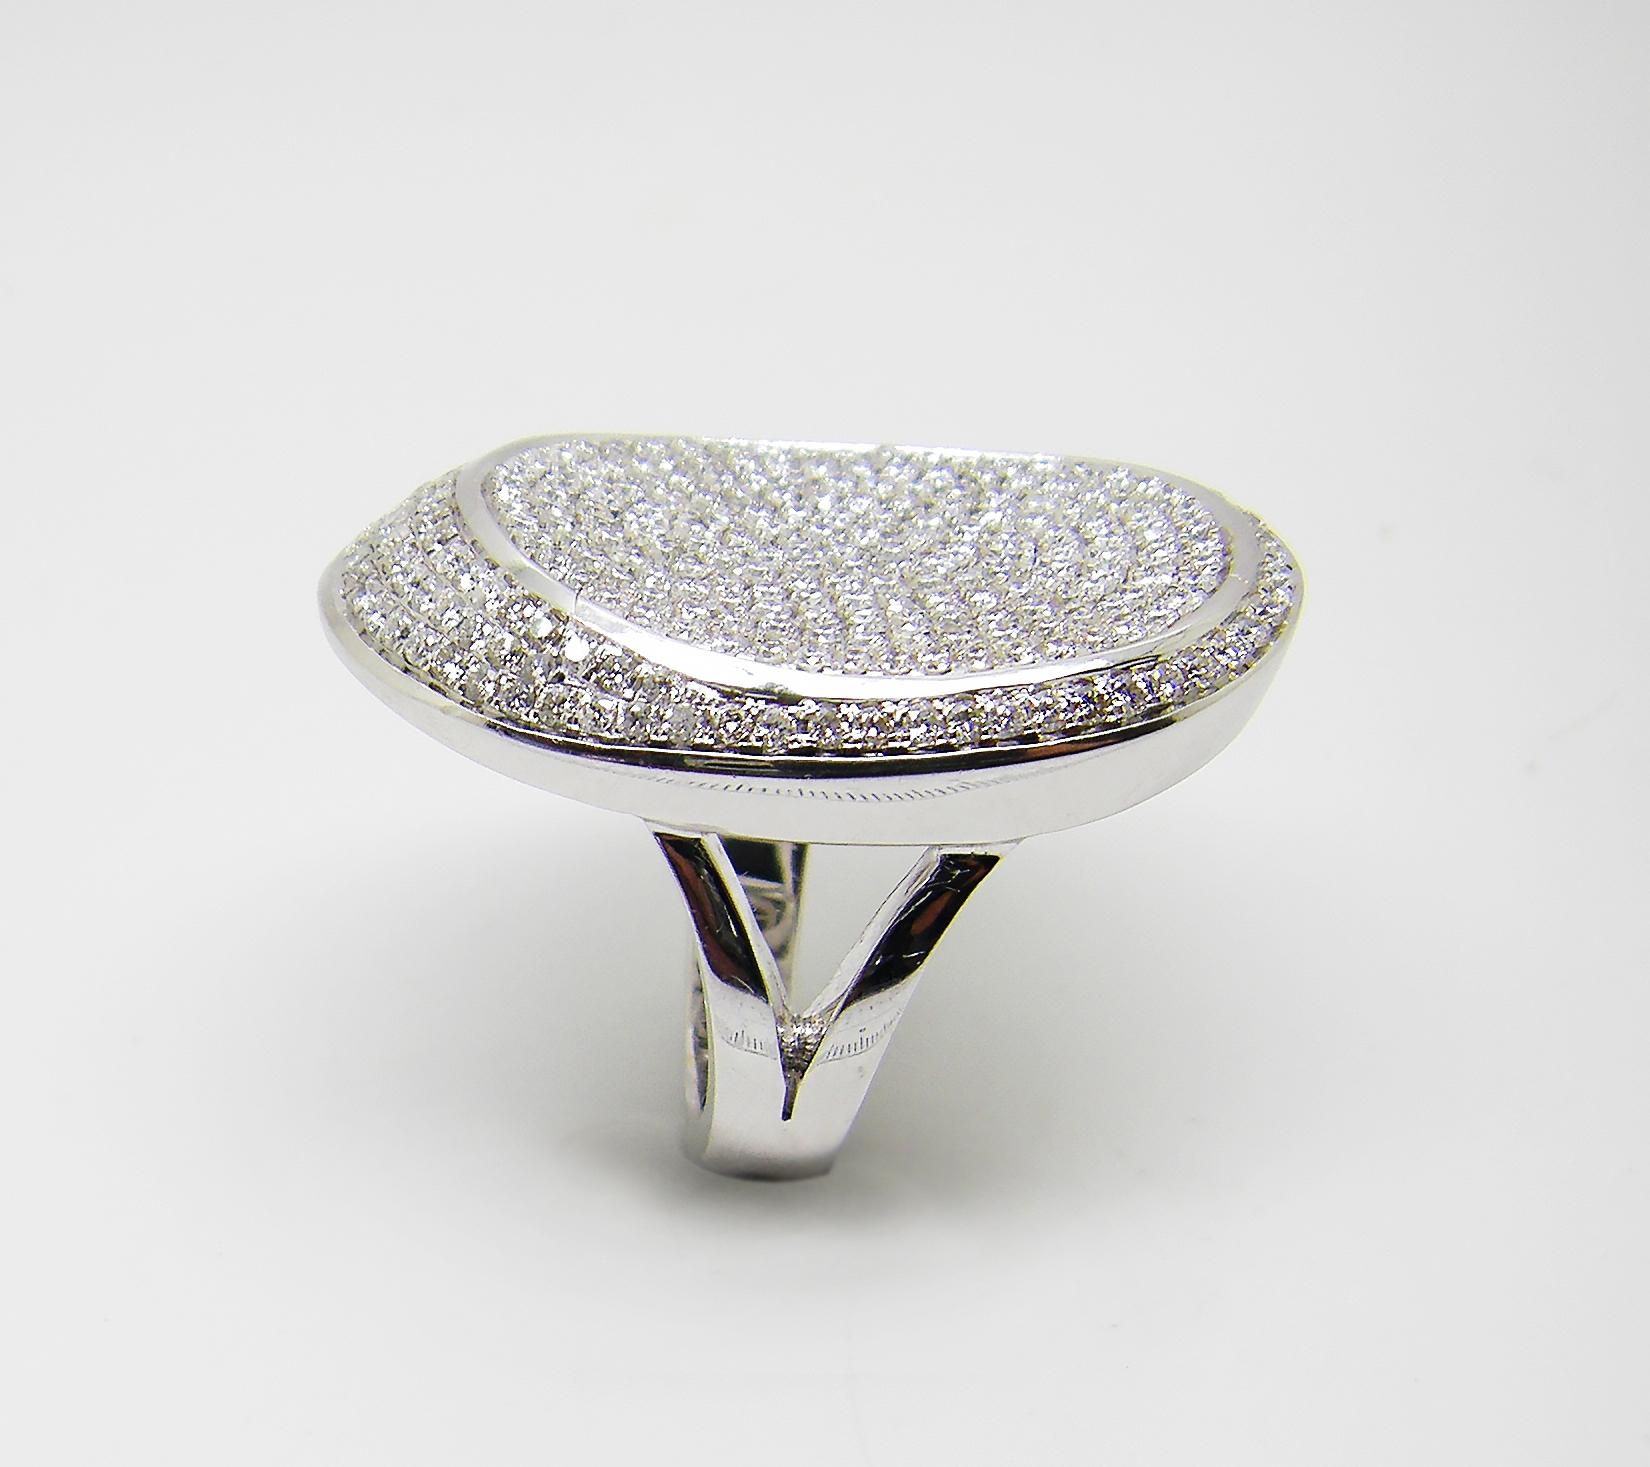 S.Georgios designer 18 Karat White Gold Brilliant Cut Pave Diamond Ring is all handmade in a unique design. The gorgeous ring features brilliant cut white diamonds total weight of 2.22 Carat and is set microscopically. We also make this beautiful